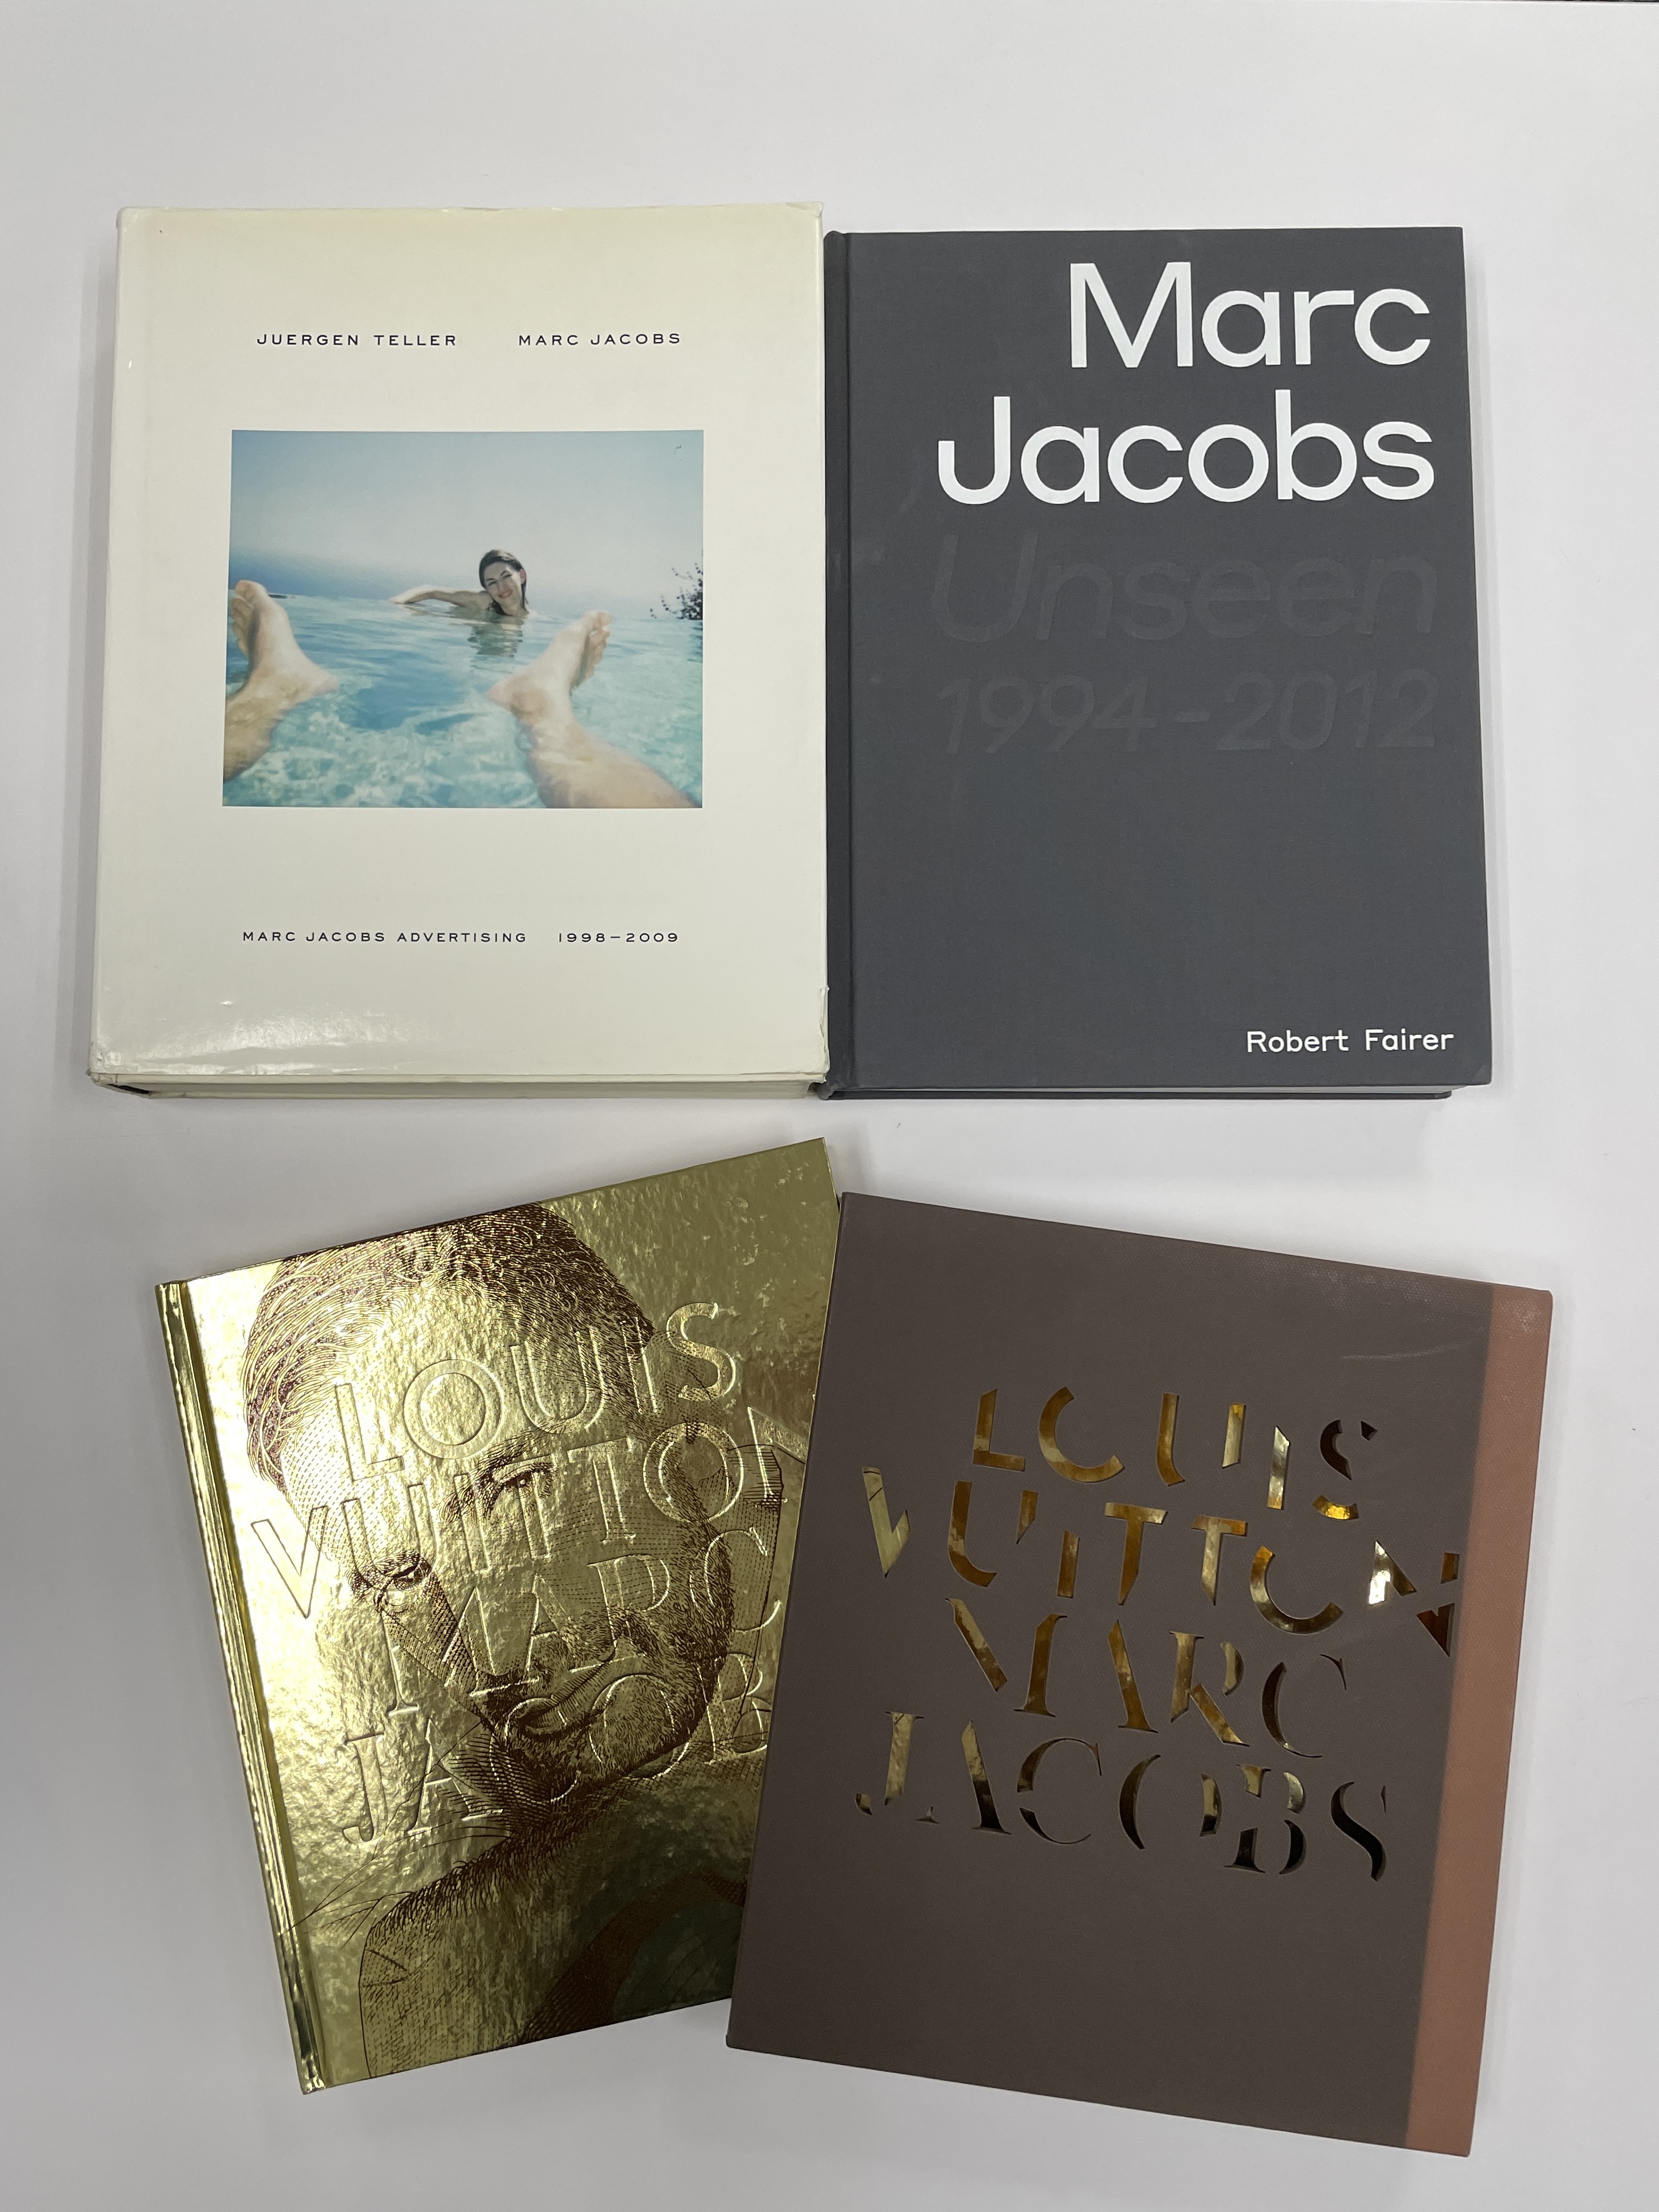 FASHION BOOKS - MARC JACOBS - Image 2 of 3